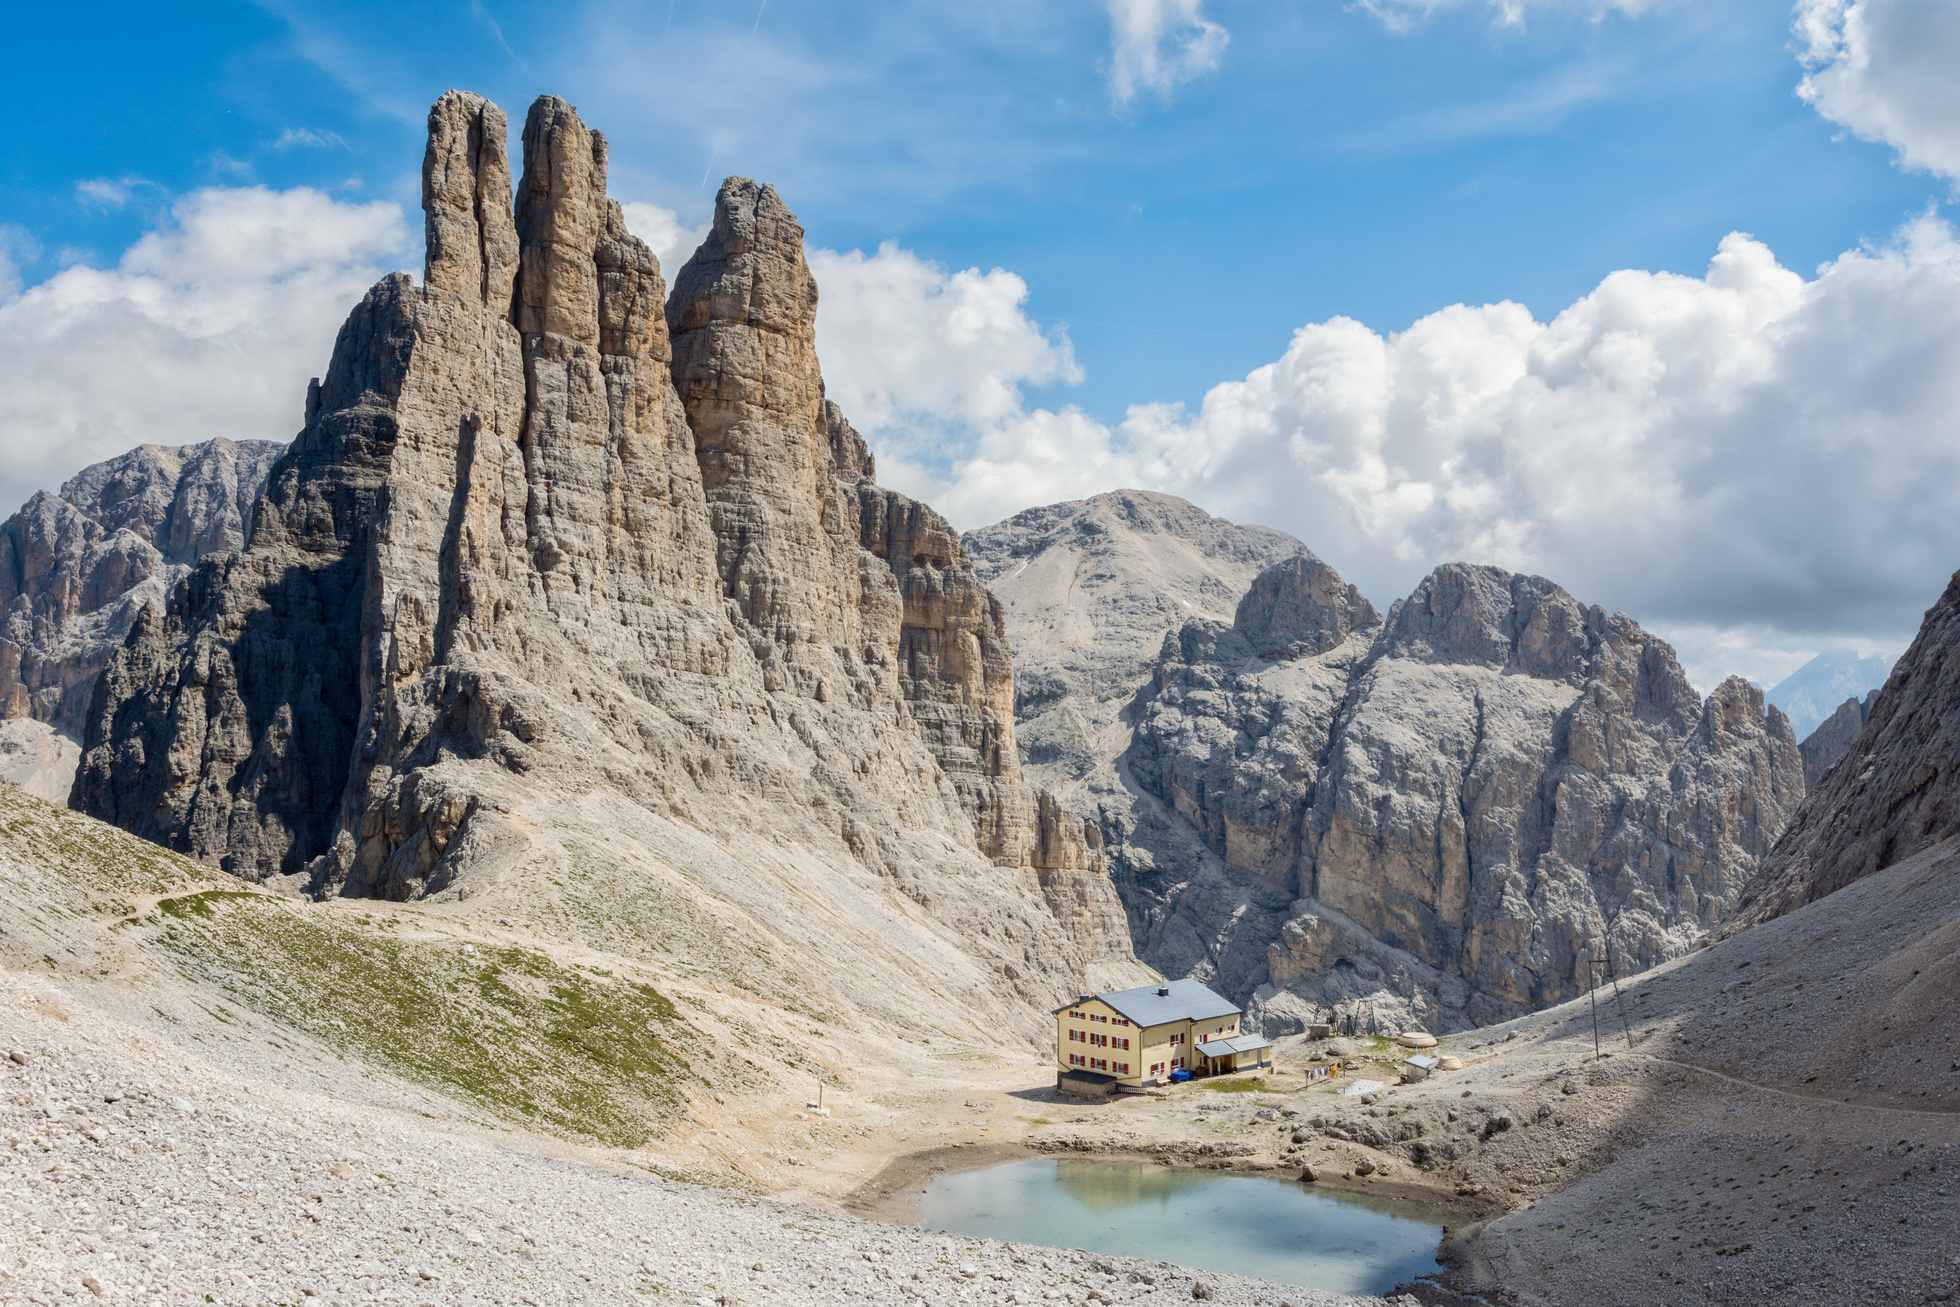 Rifugio Re Alberto and the Vajolet Towers (Torri Vajolet), Dolomites, Italy on a beautiful summer day